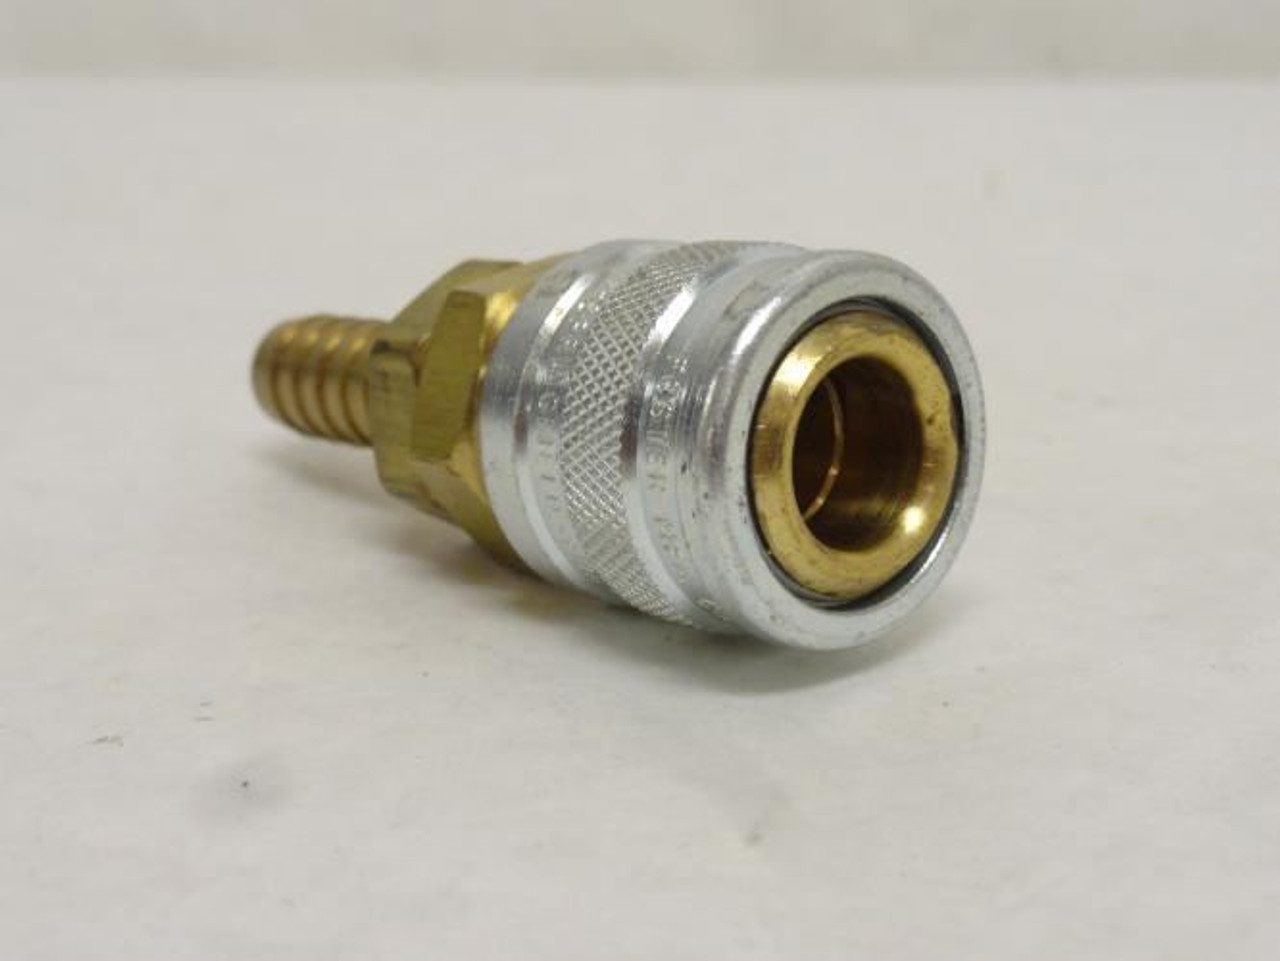 Foster Mfg 3703W; Manual Connect Fitting; One Way; Size: 3/8"